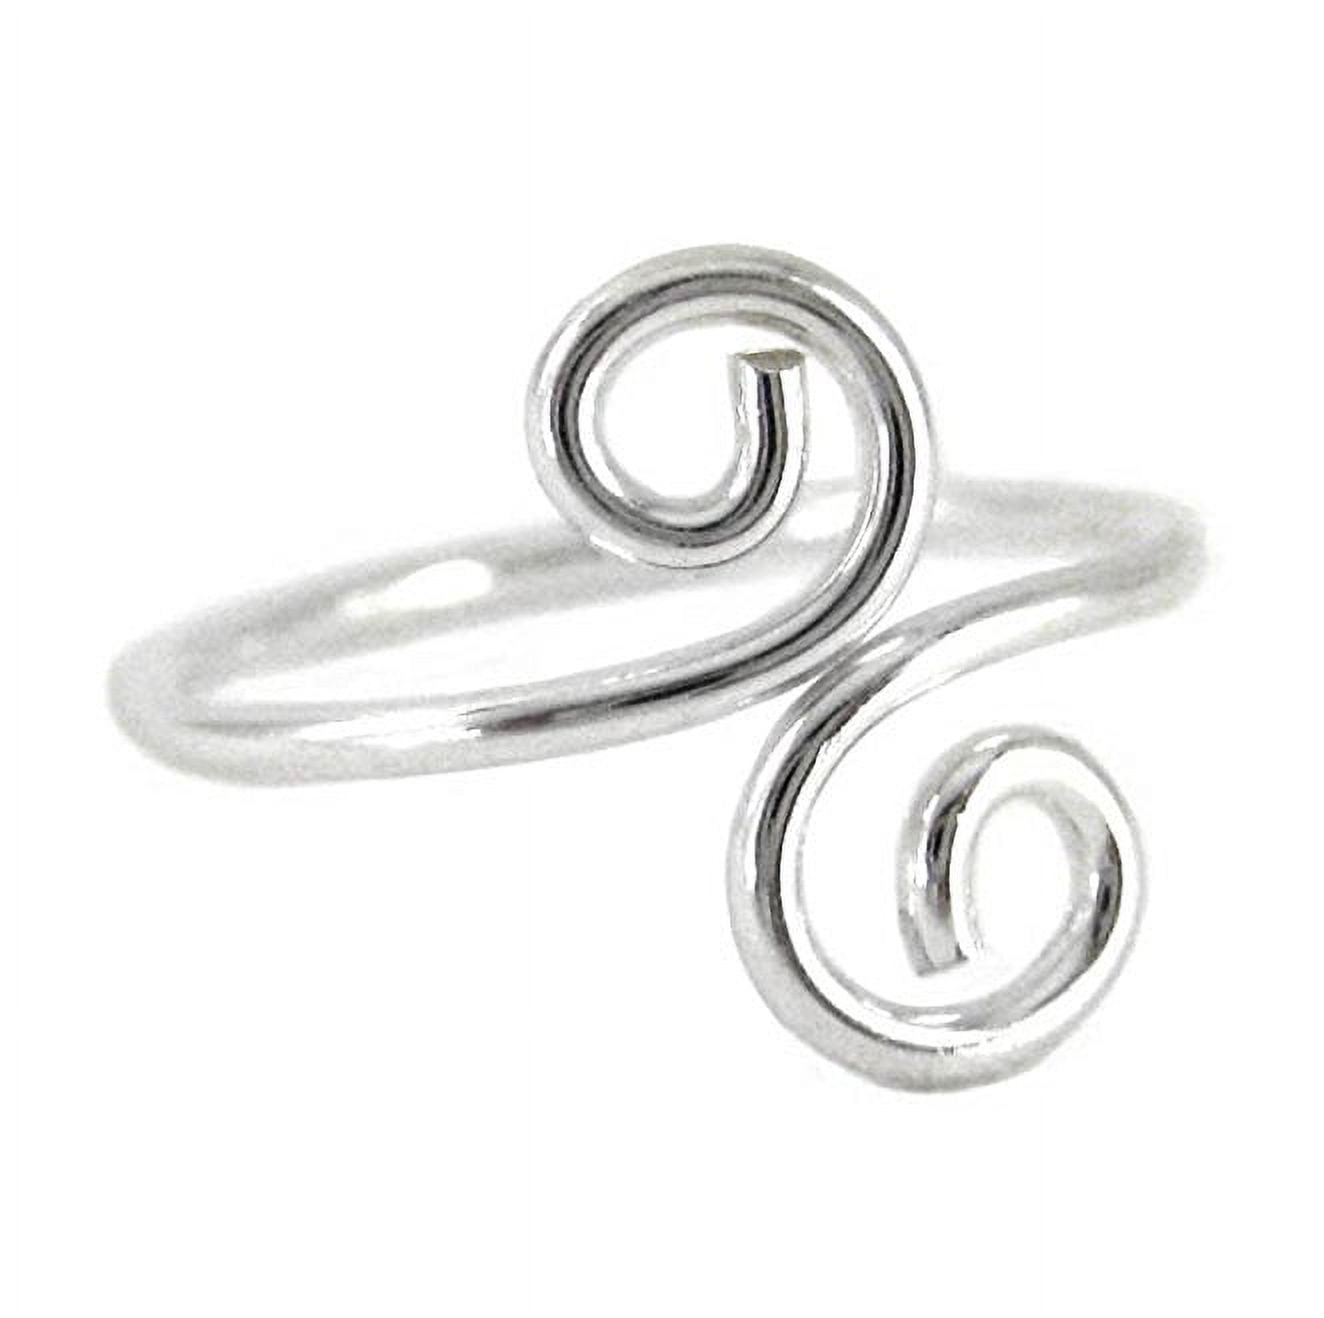 Simple Sterling Silver Spiral Ring Handmade Minimalist Snake - Etsy |  Handmade sterling silver, Handmade sterling silver rings, Spiral ring